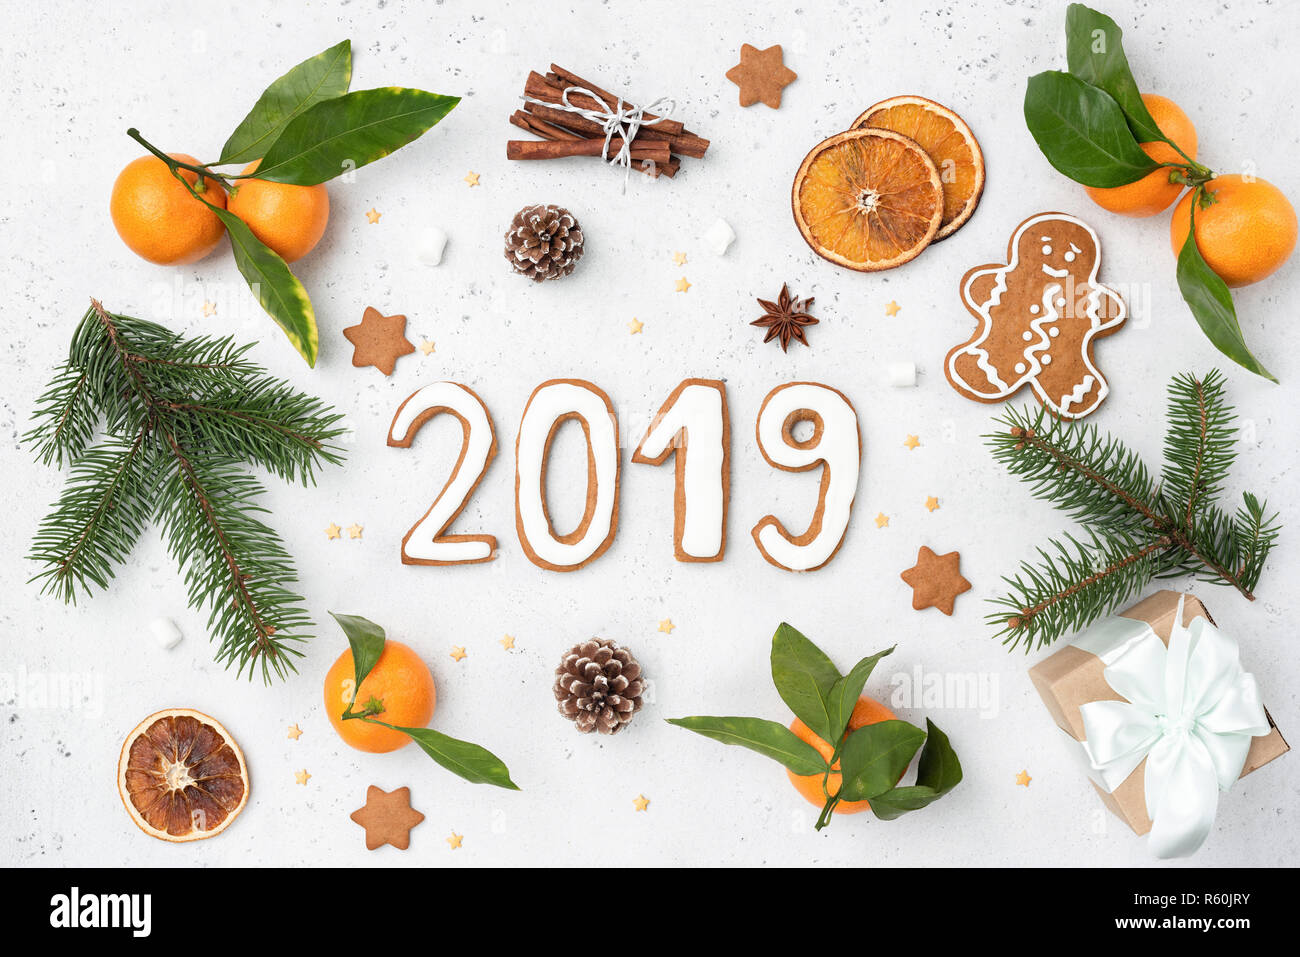 2019 greeting with gingerbread cookies, fir tree, decorations. New Year or Christmas greeting card, design template. Flat lay composition Stock Photo